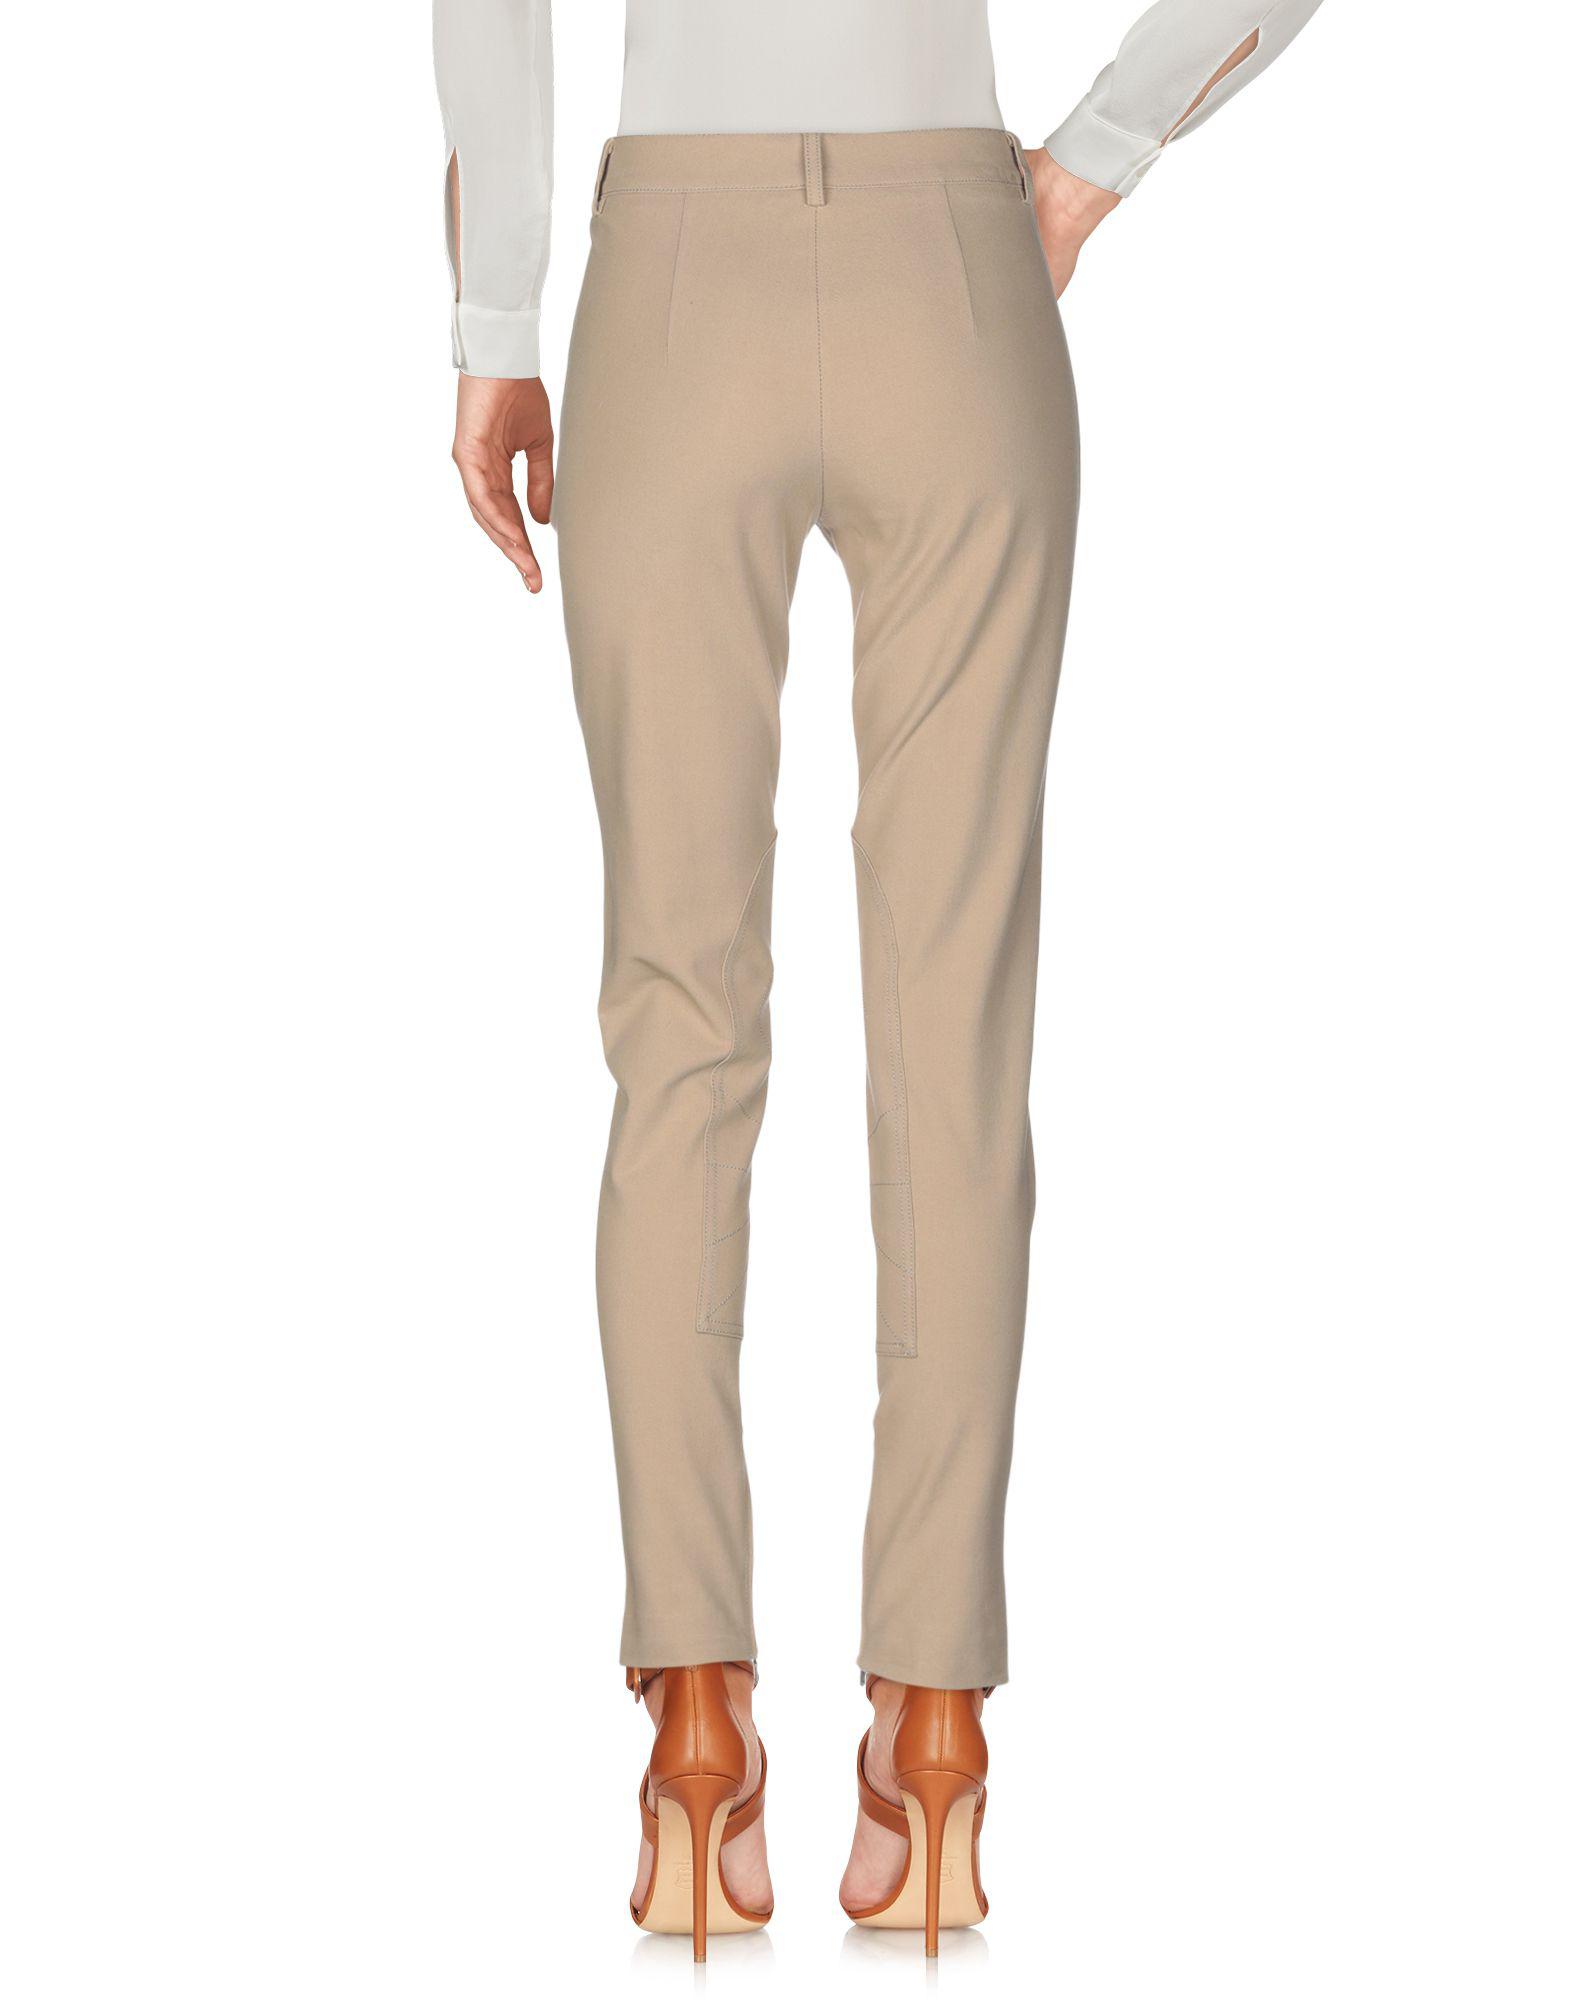 Lyst - Etro Casual Pants in Natural